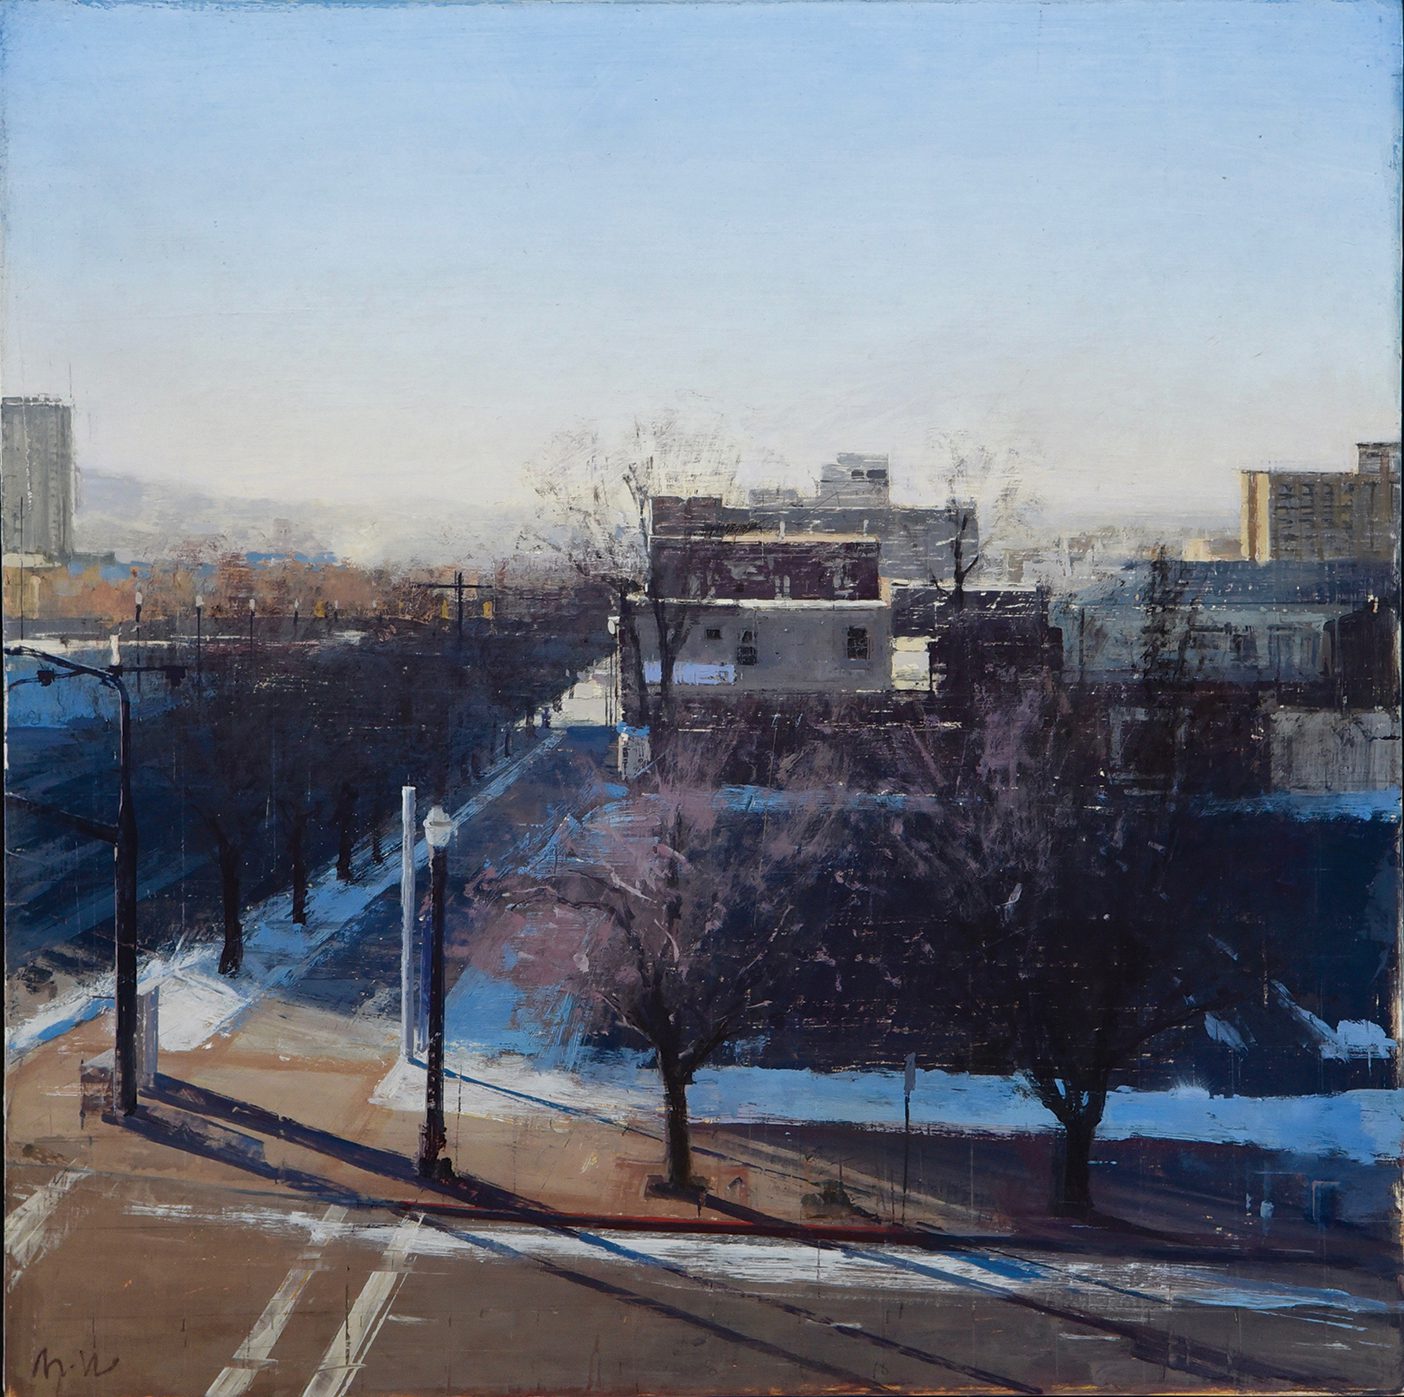 An oil painting of a Salt Lake City street crossing; from a bird's eye view you see a two sidewalks perpendicular, one going up and the other to the right. Two dead trees line the sidewalk going right and an empty parking lot sits behind them, followed by muted-colored buildings behind and a dusky blue sky above.